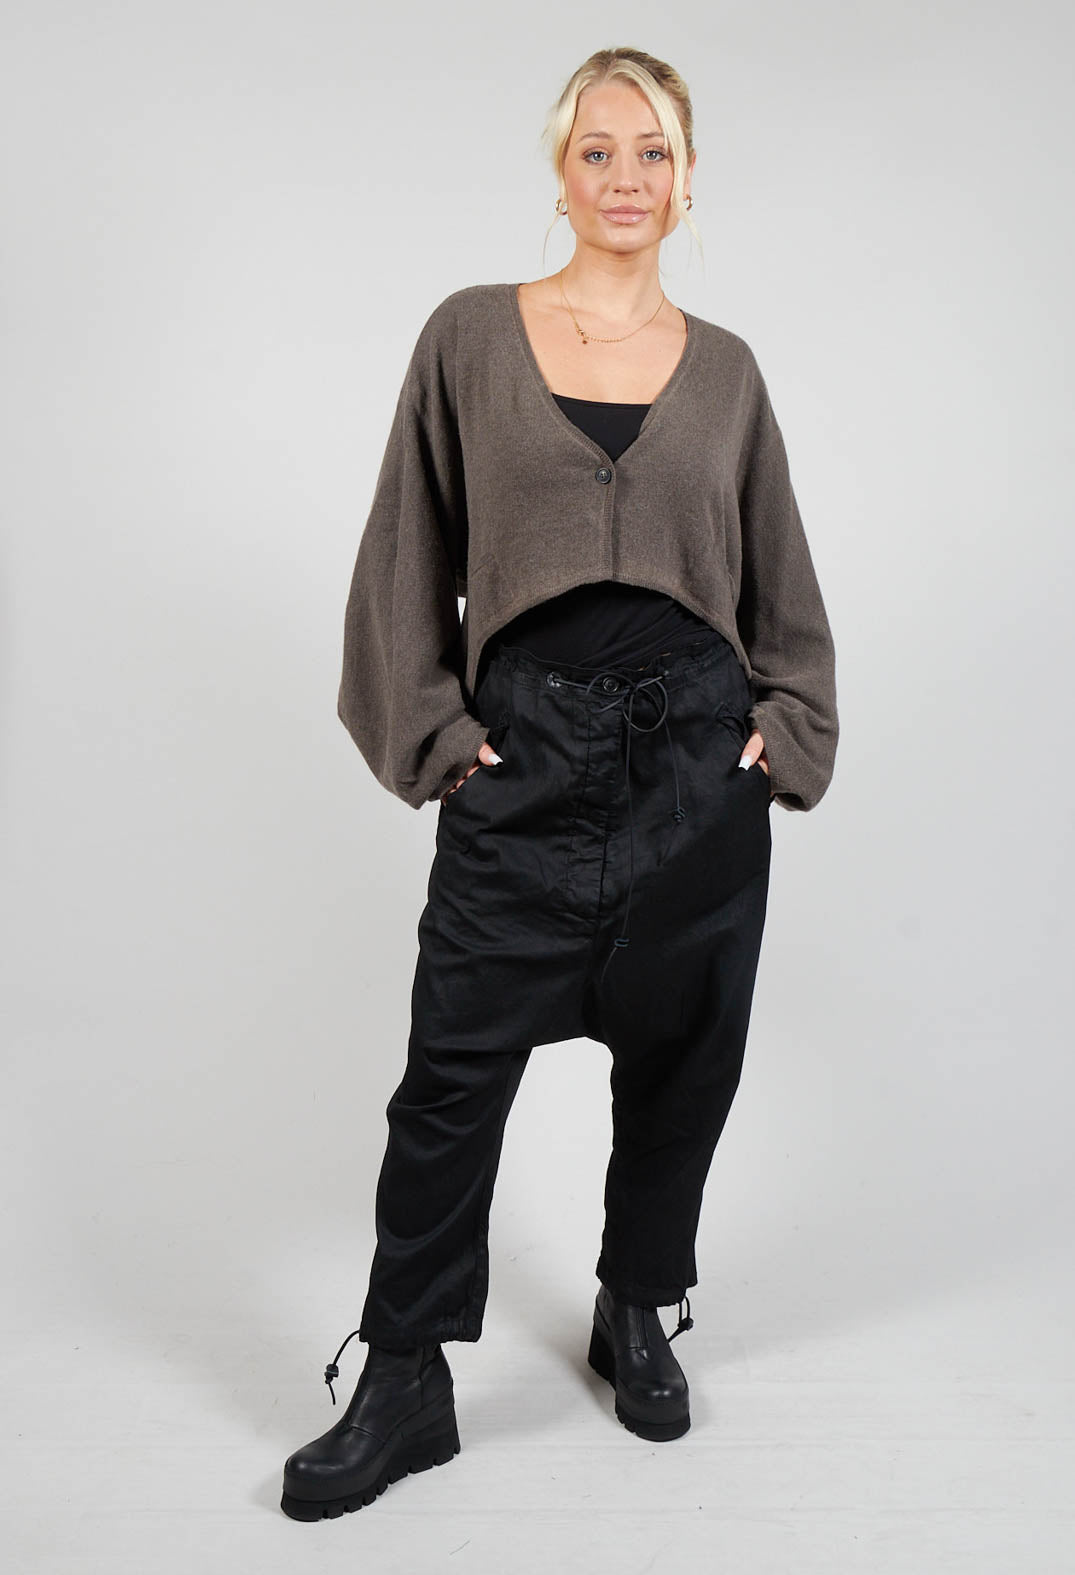 Drawstring Trousers in Black